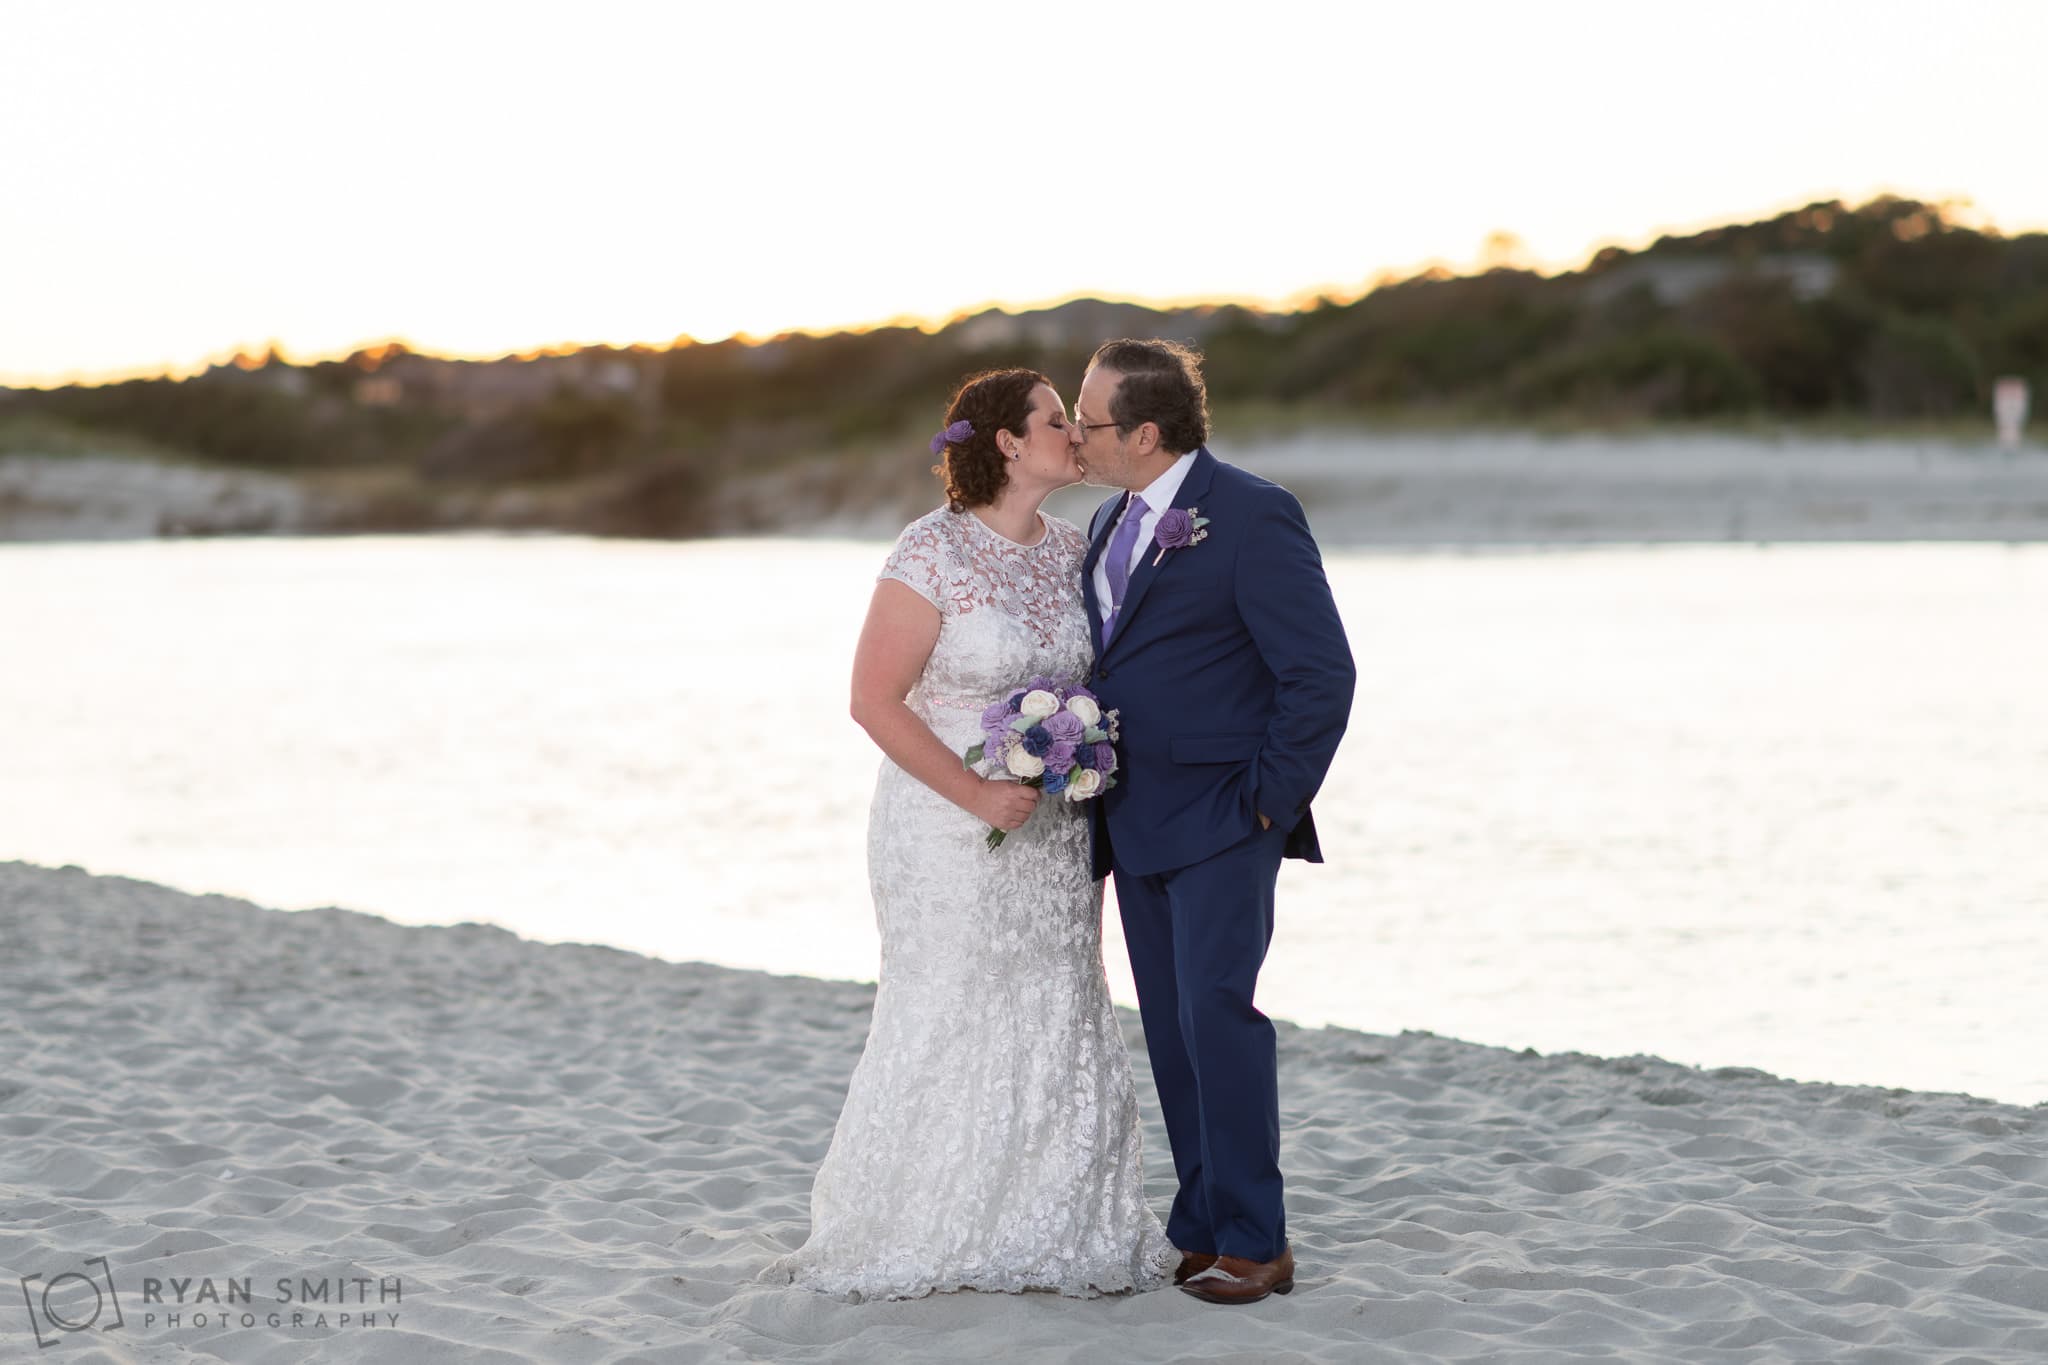 Kiss in front of the inlet - North Beach Plantation